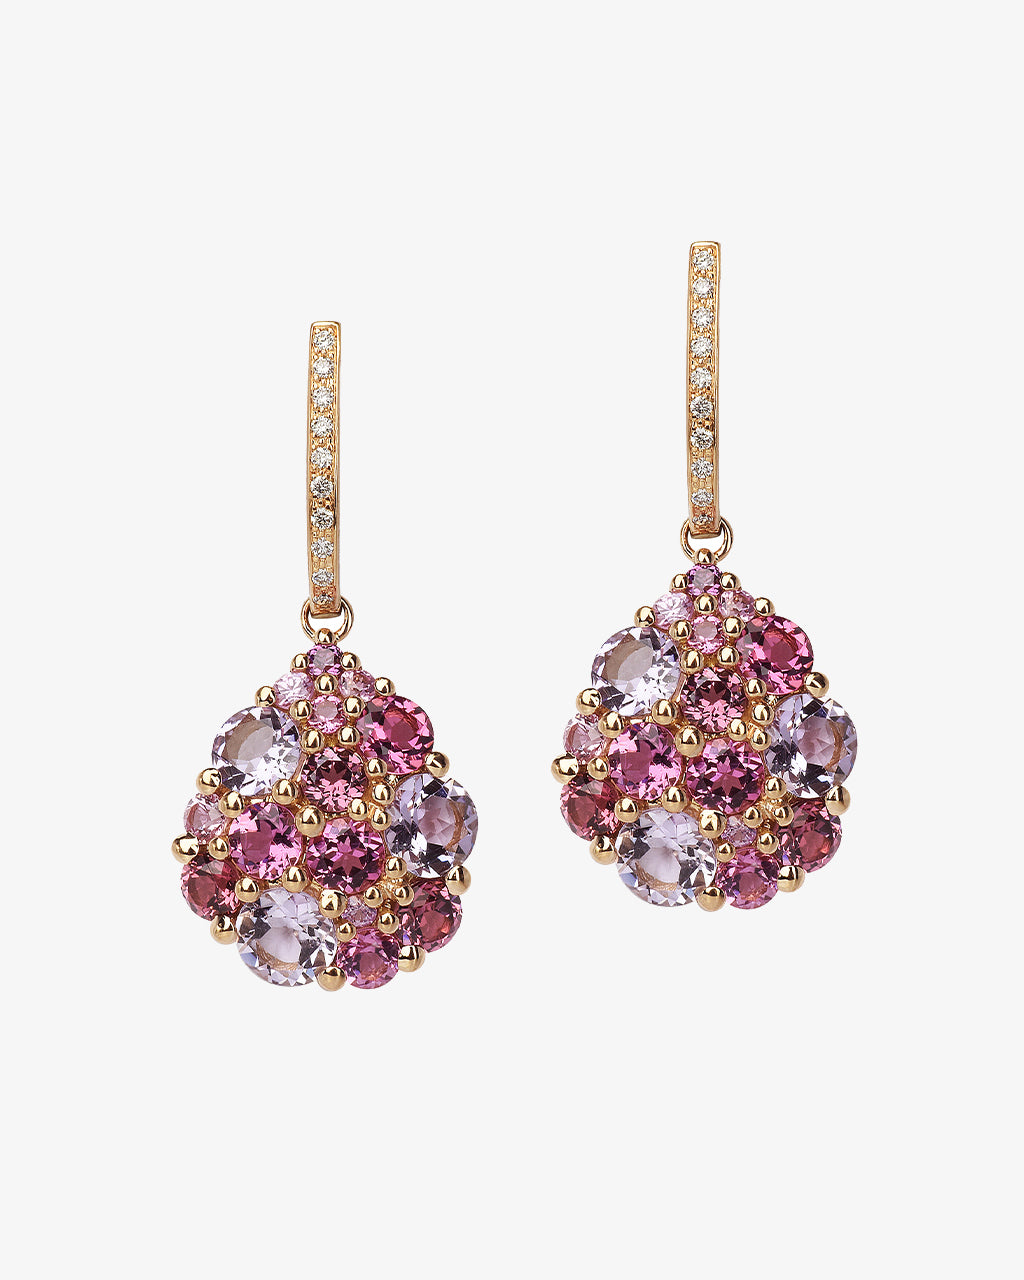 Isabelle Langlois Multi Stone and Diamond Drop Earrings